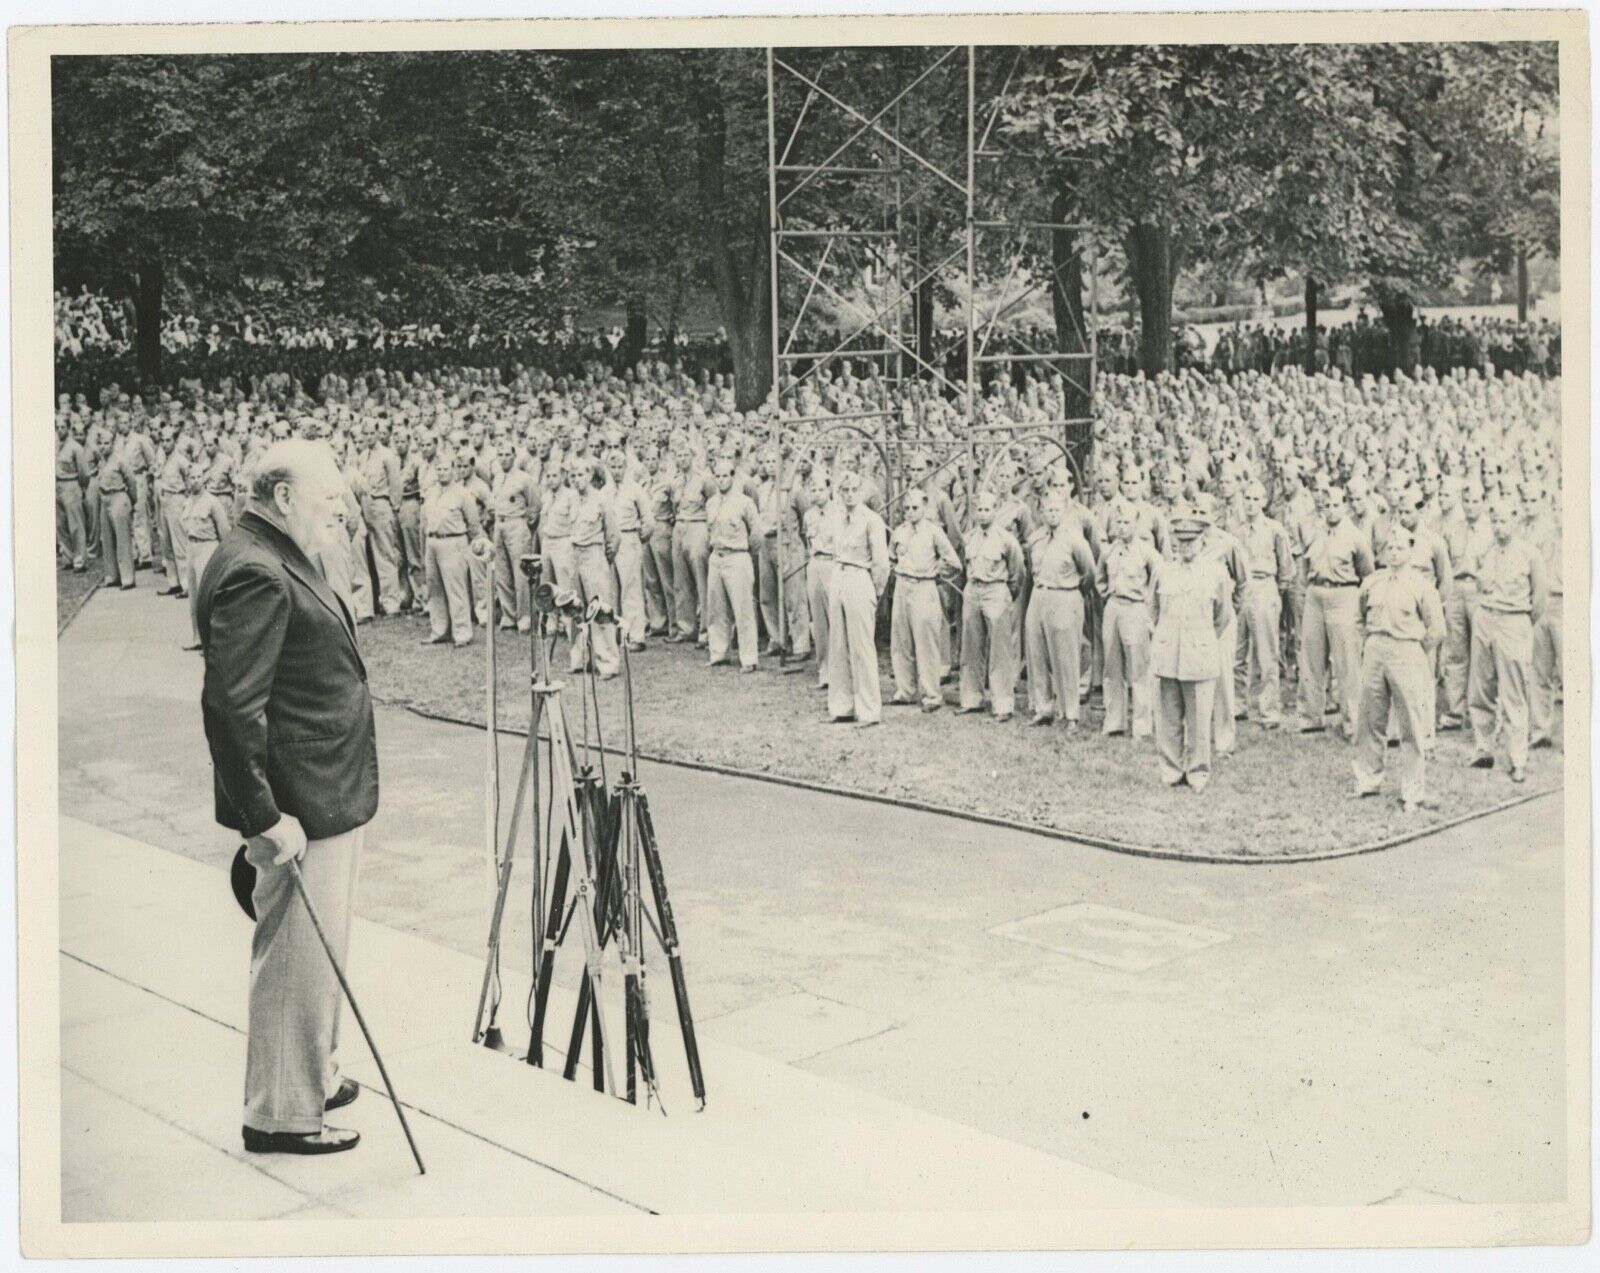 6 September 1943 press photo of Churchill addressing U.S. Naval and Army cadets